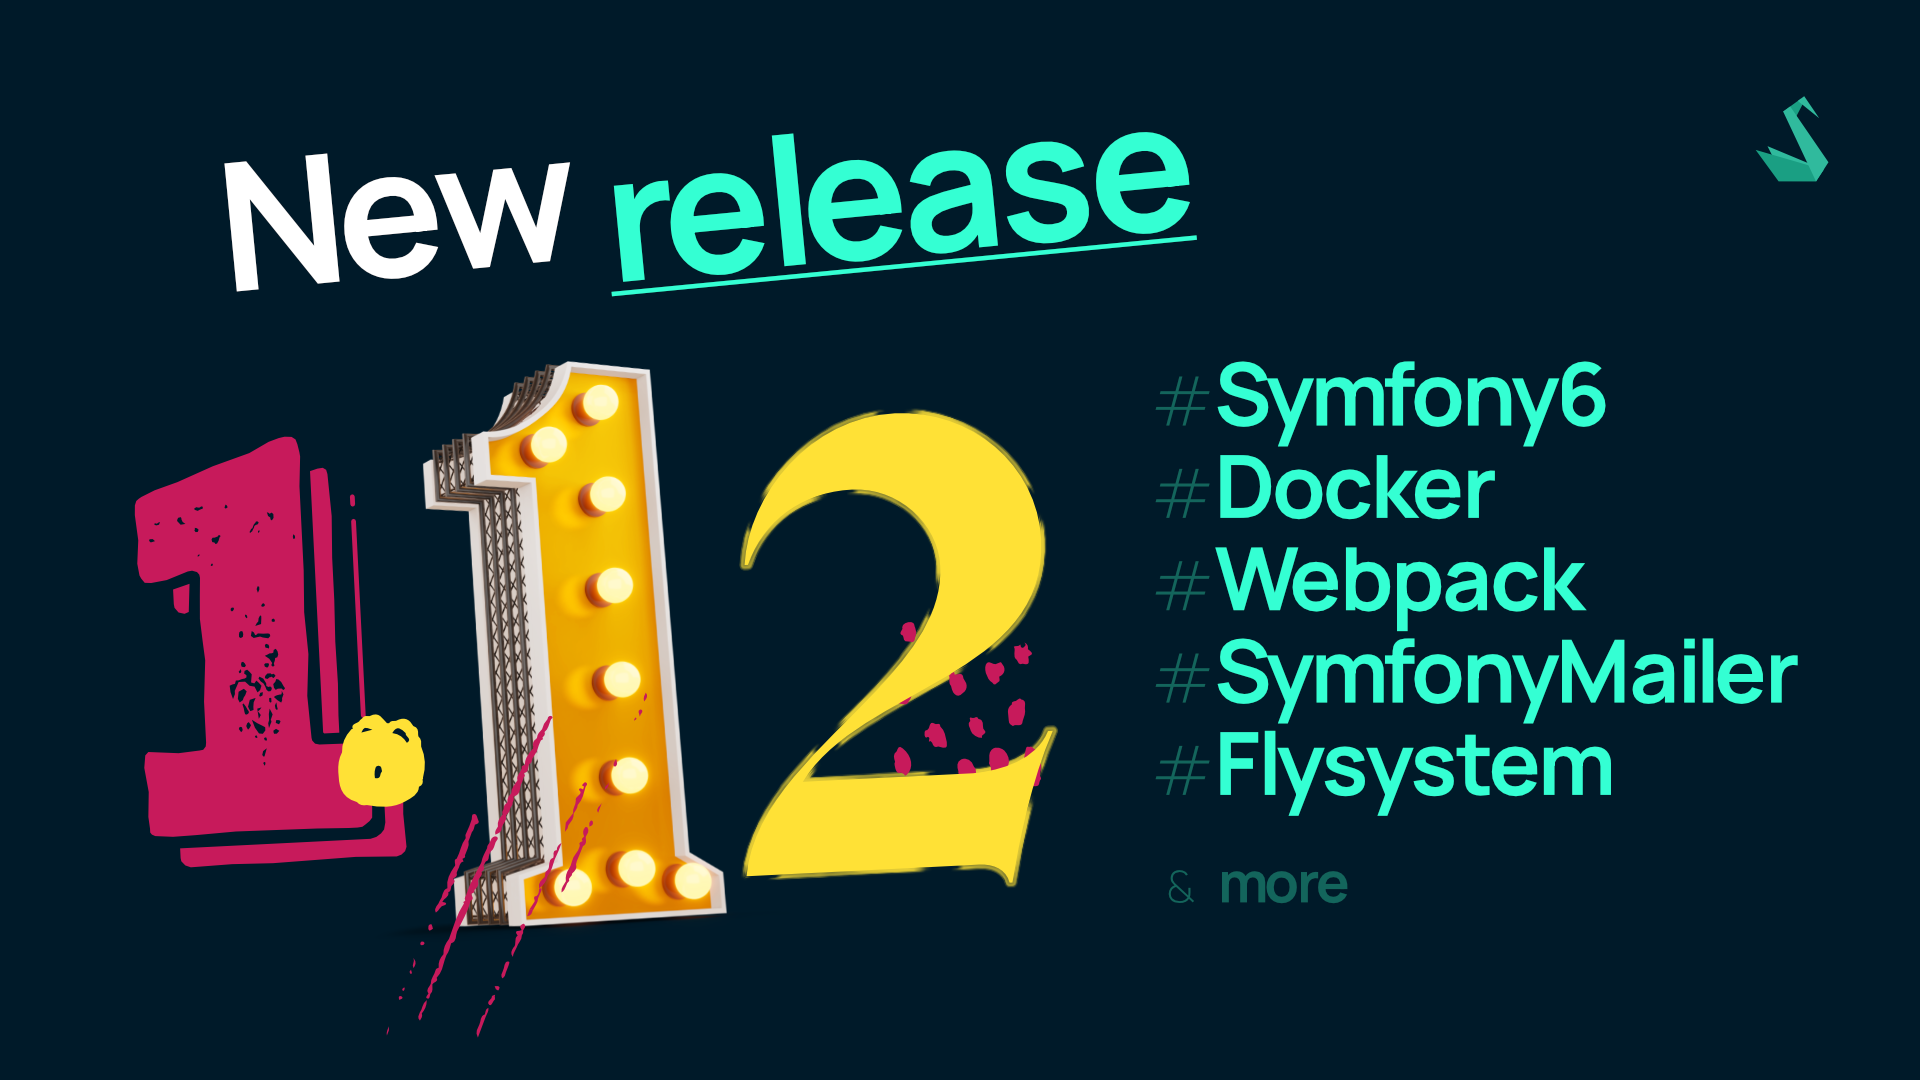 👻 Trick or… Sylius 1.12 release?🍬 Sylius 1.12 comes with Symfony 6, Docker, and a bag of enhancements to both admin, shop, and API!